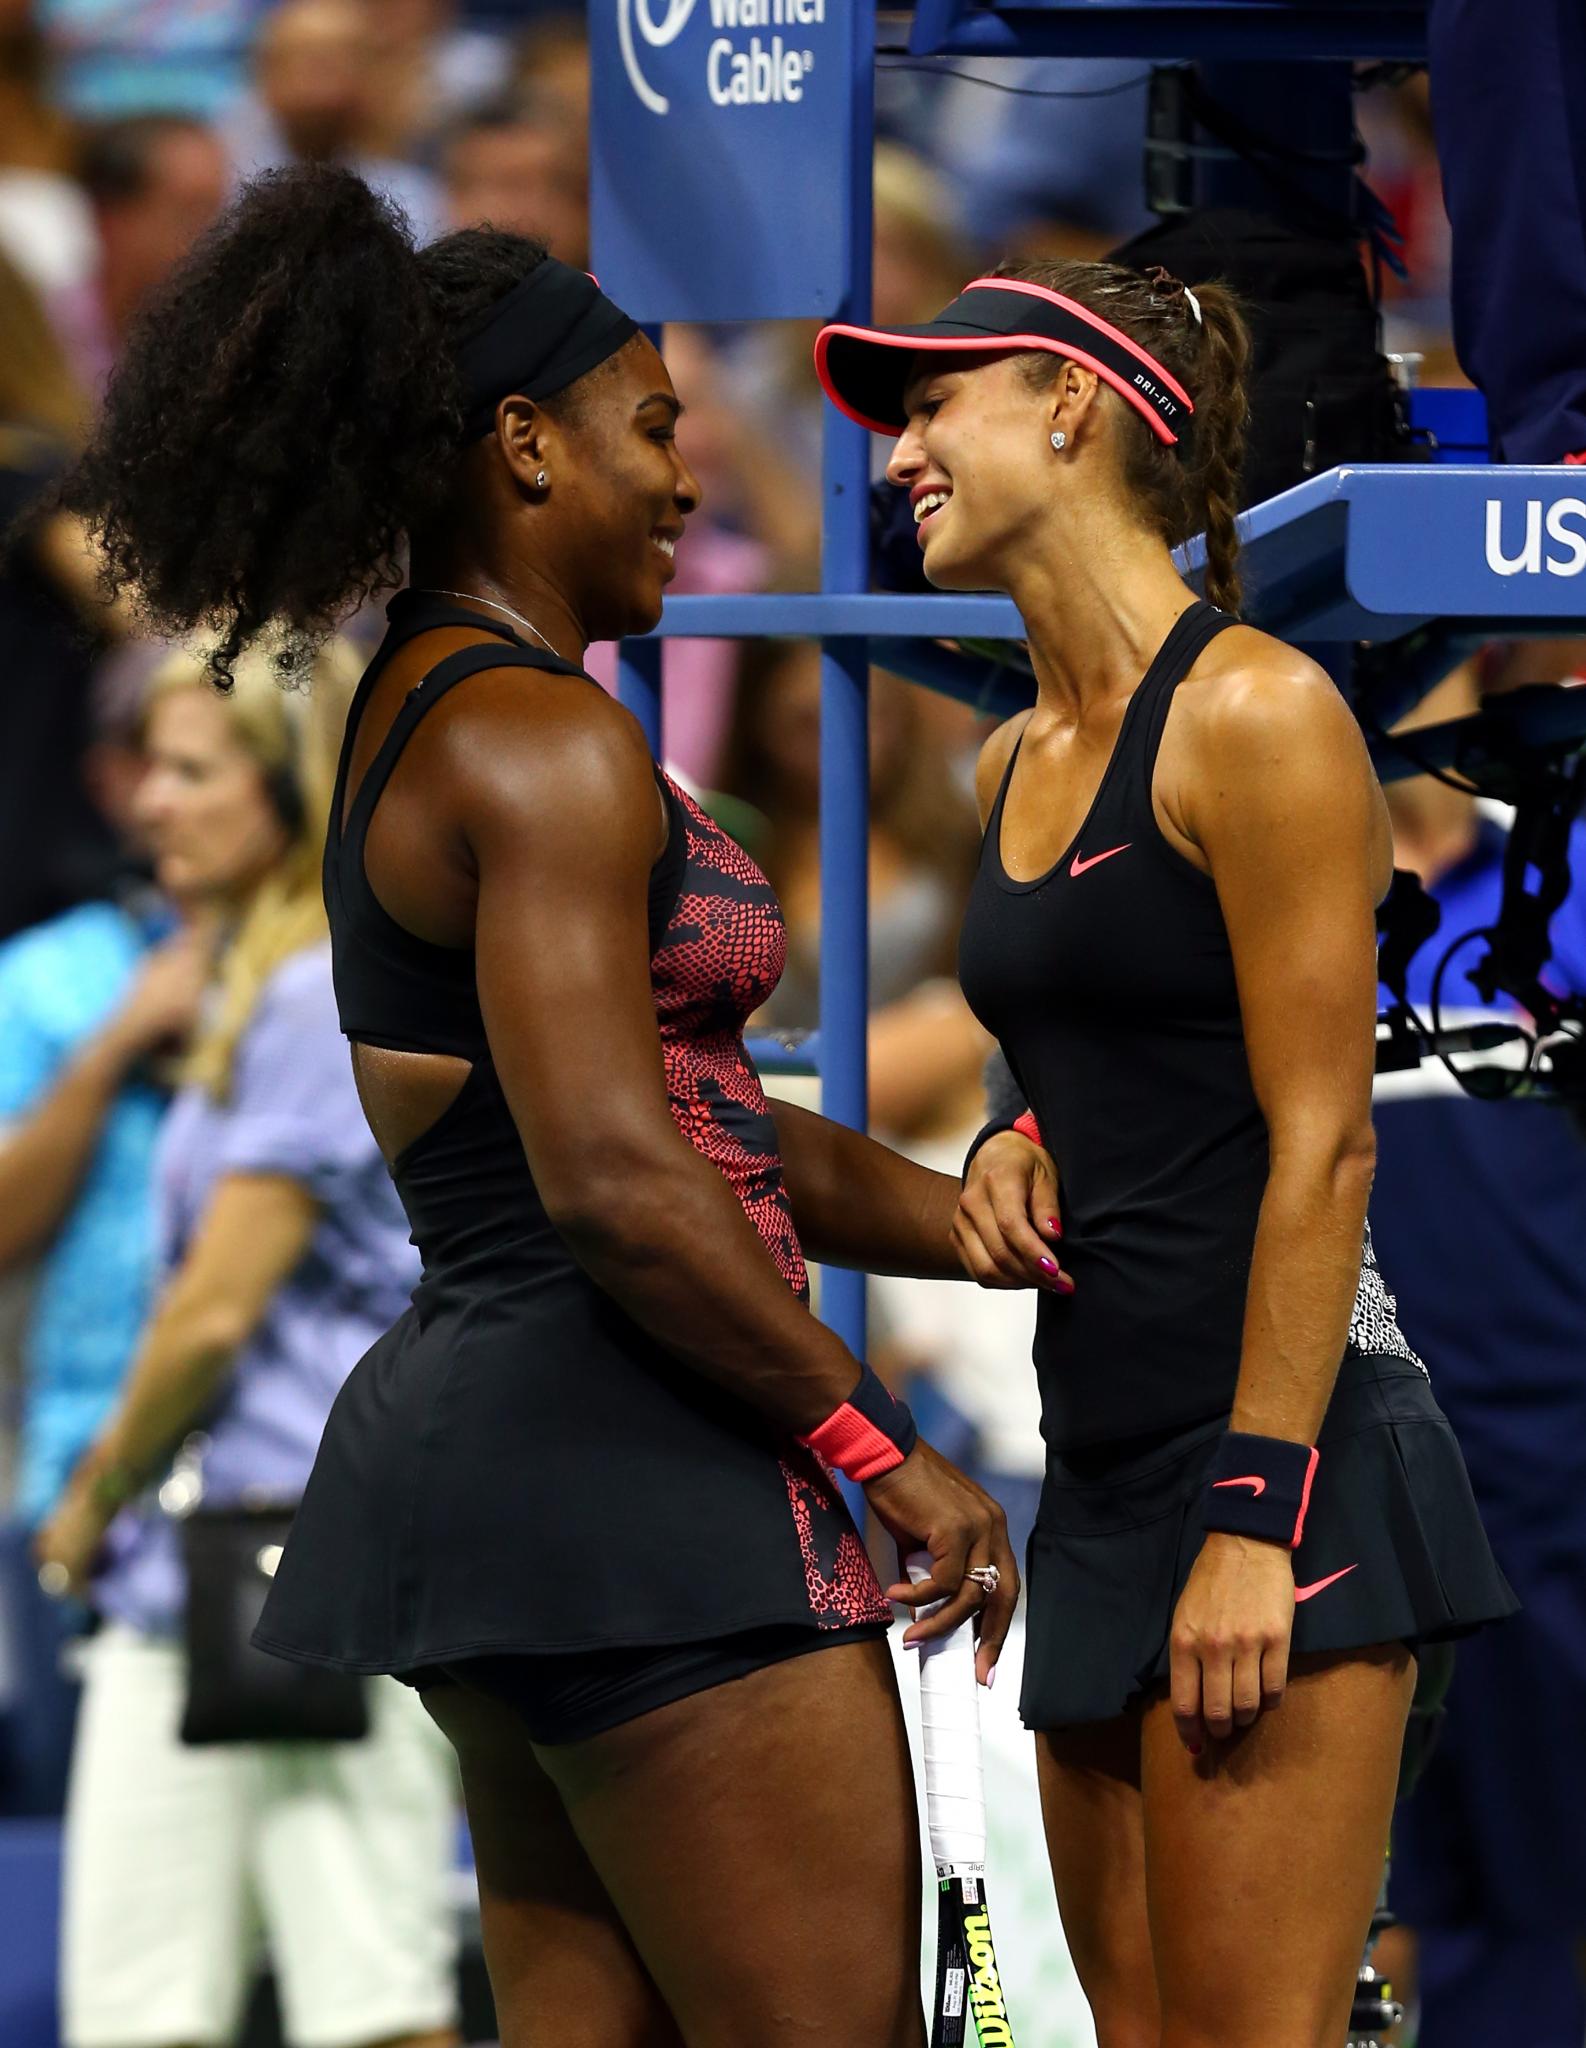 Life Lessons I Learned Watching Serena at the U.S. Open